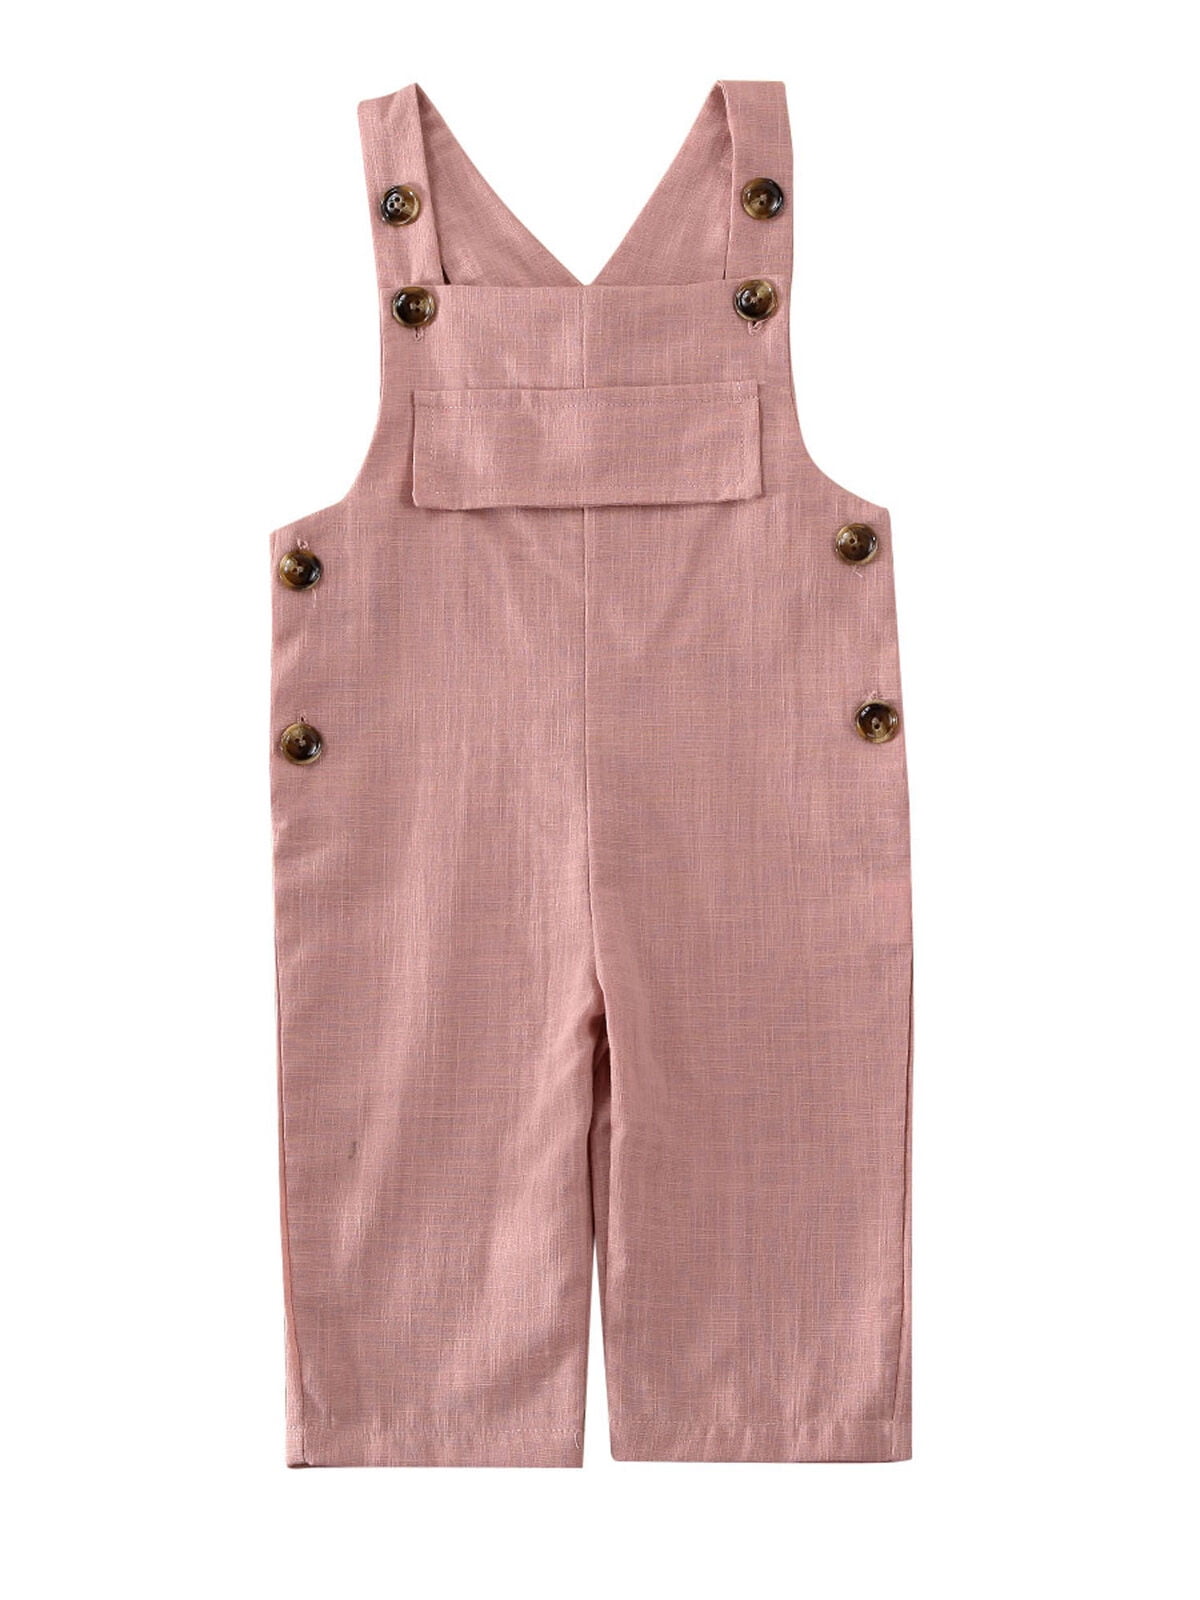 Todder Baby Boys Girls Kid Suspender Pants Solid Color Corduroy Strap Jumpsuit Overalls Casual Outfits 